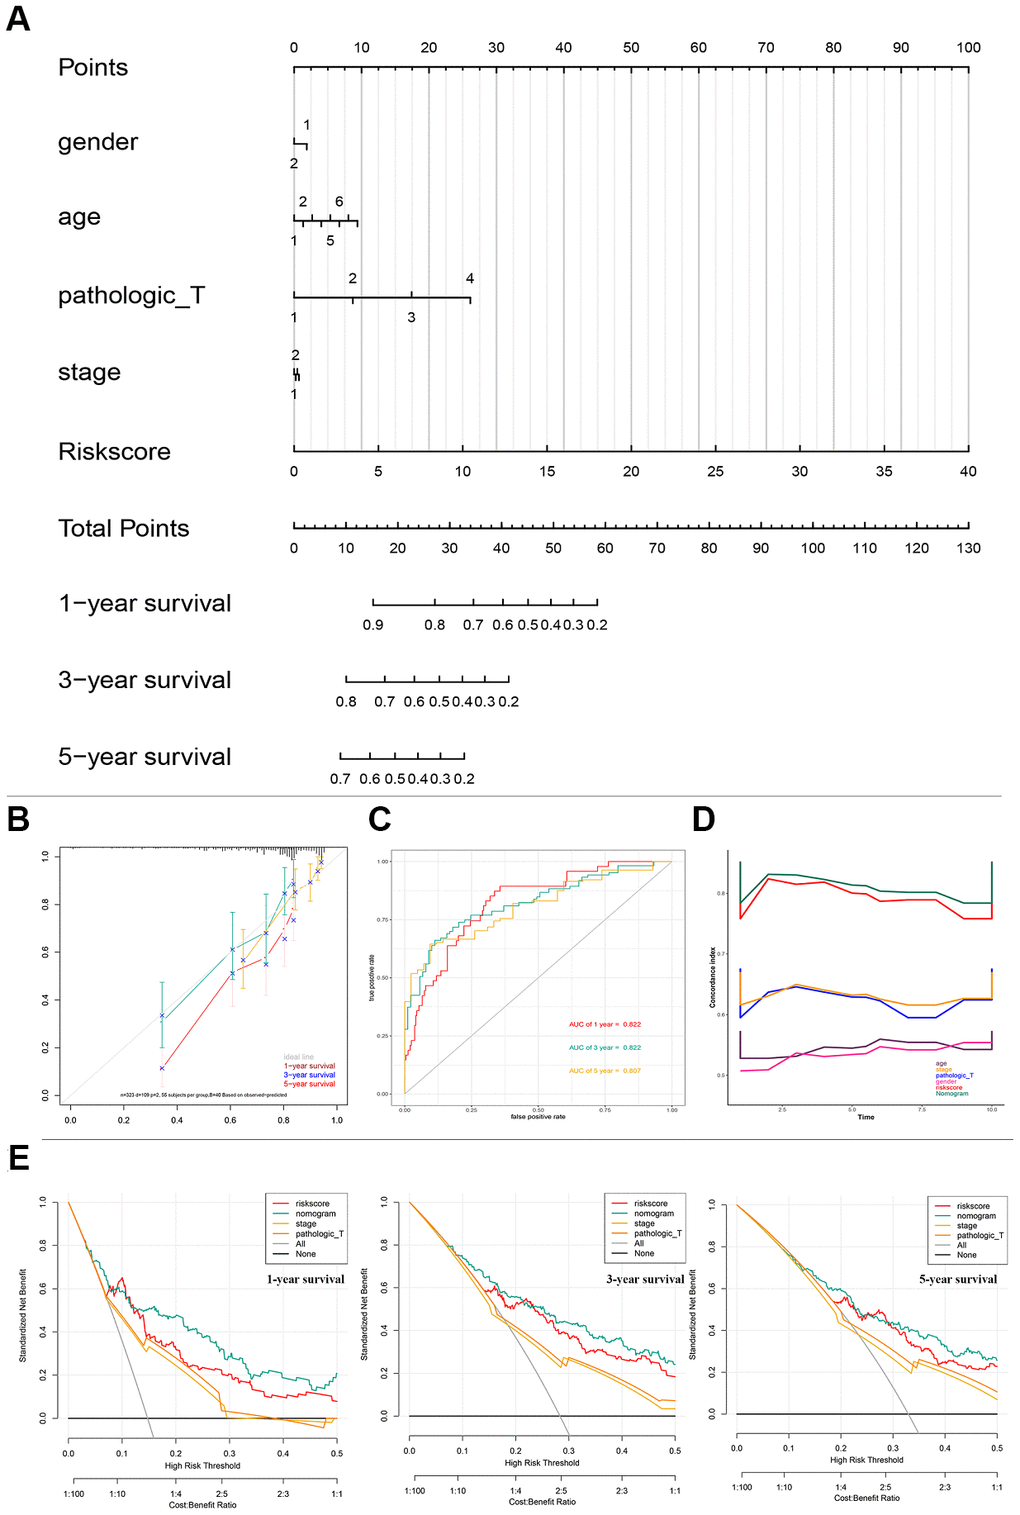 Nomogram predicting overall survival for HCC patients in TCGA cohorts. (A) A prognostic nomogram predicting 1-, 3-, and 5- year OS of HCC. (B) Calibration plots of the nomogram. (C) Time-dependent ROC analysis of nomogram predicting 1-, 3-, and 5- year OS of HCC. (D) C-index of the nomogram. (E) Decision curve analysis of nomogram predicting 1-, 3-, and 5- year OS of HCC comparing the risk score, stage and Pathologic T. HCC, hepatocellular carcinoma; TCGA, The Cancer Genome Atlas; OS, overall survival; ROC, receiver operating characteristic curve.